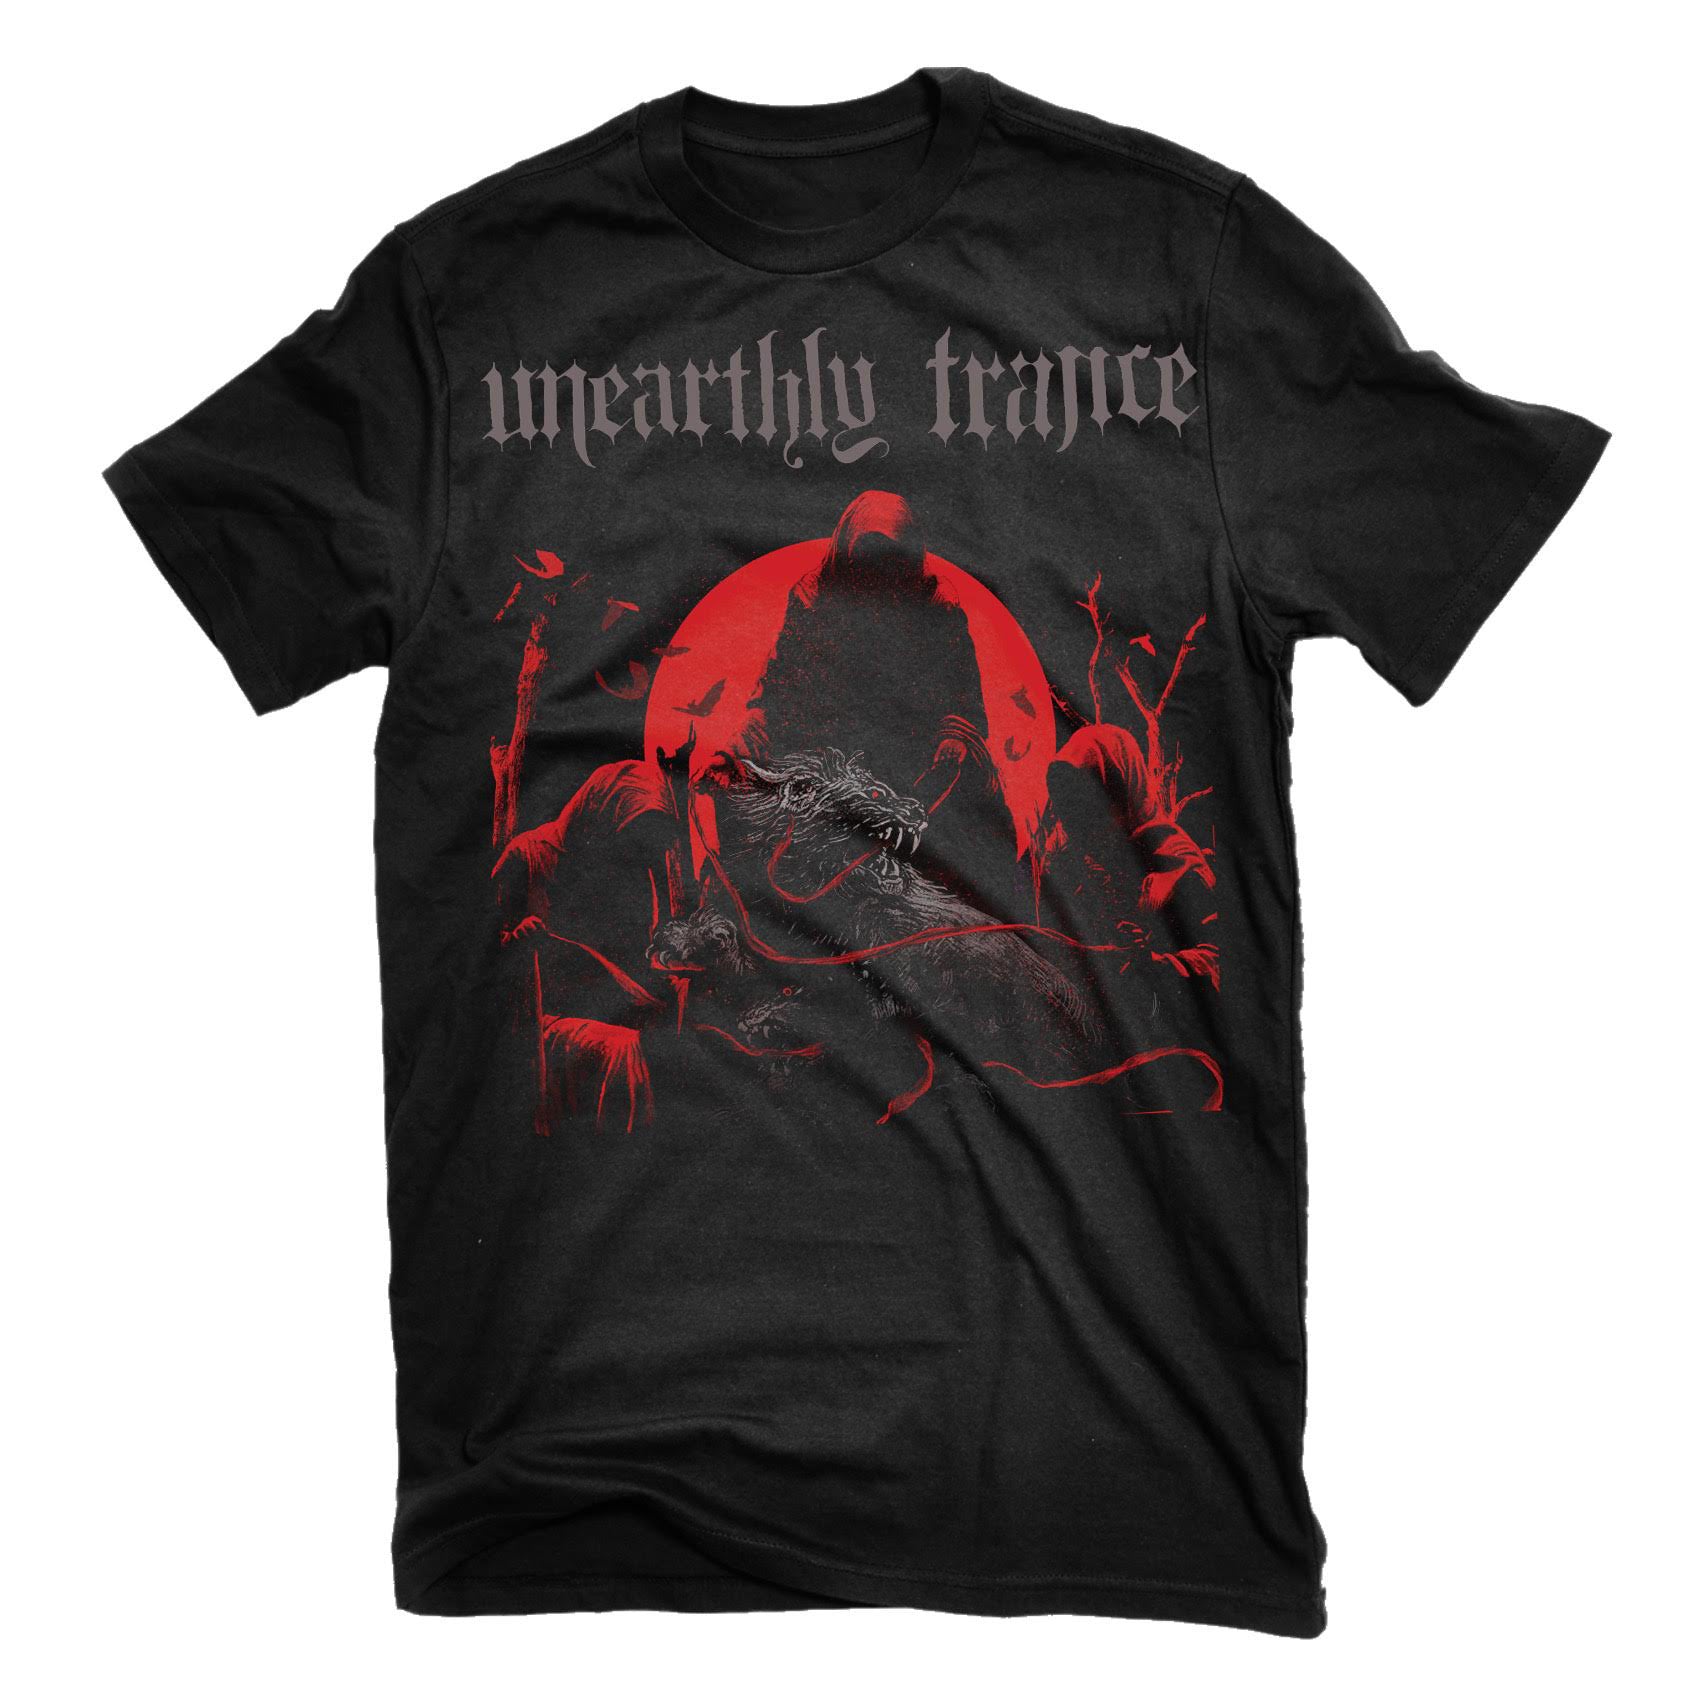 Unearthly Trance "Stalking The Ghost" T-Shirt